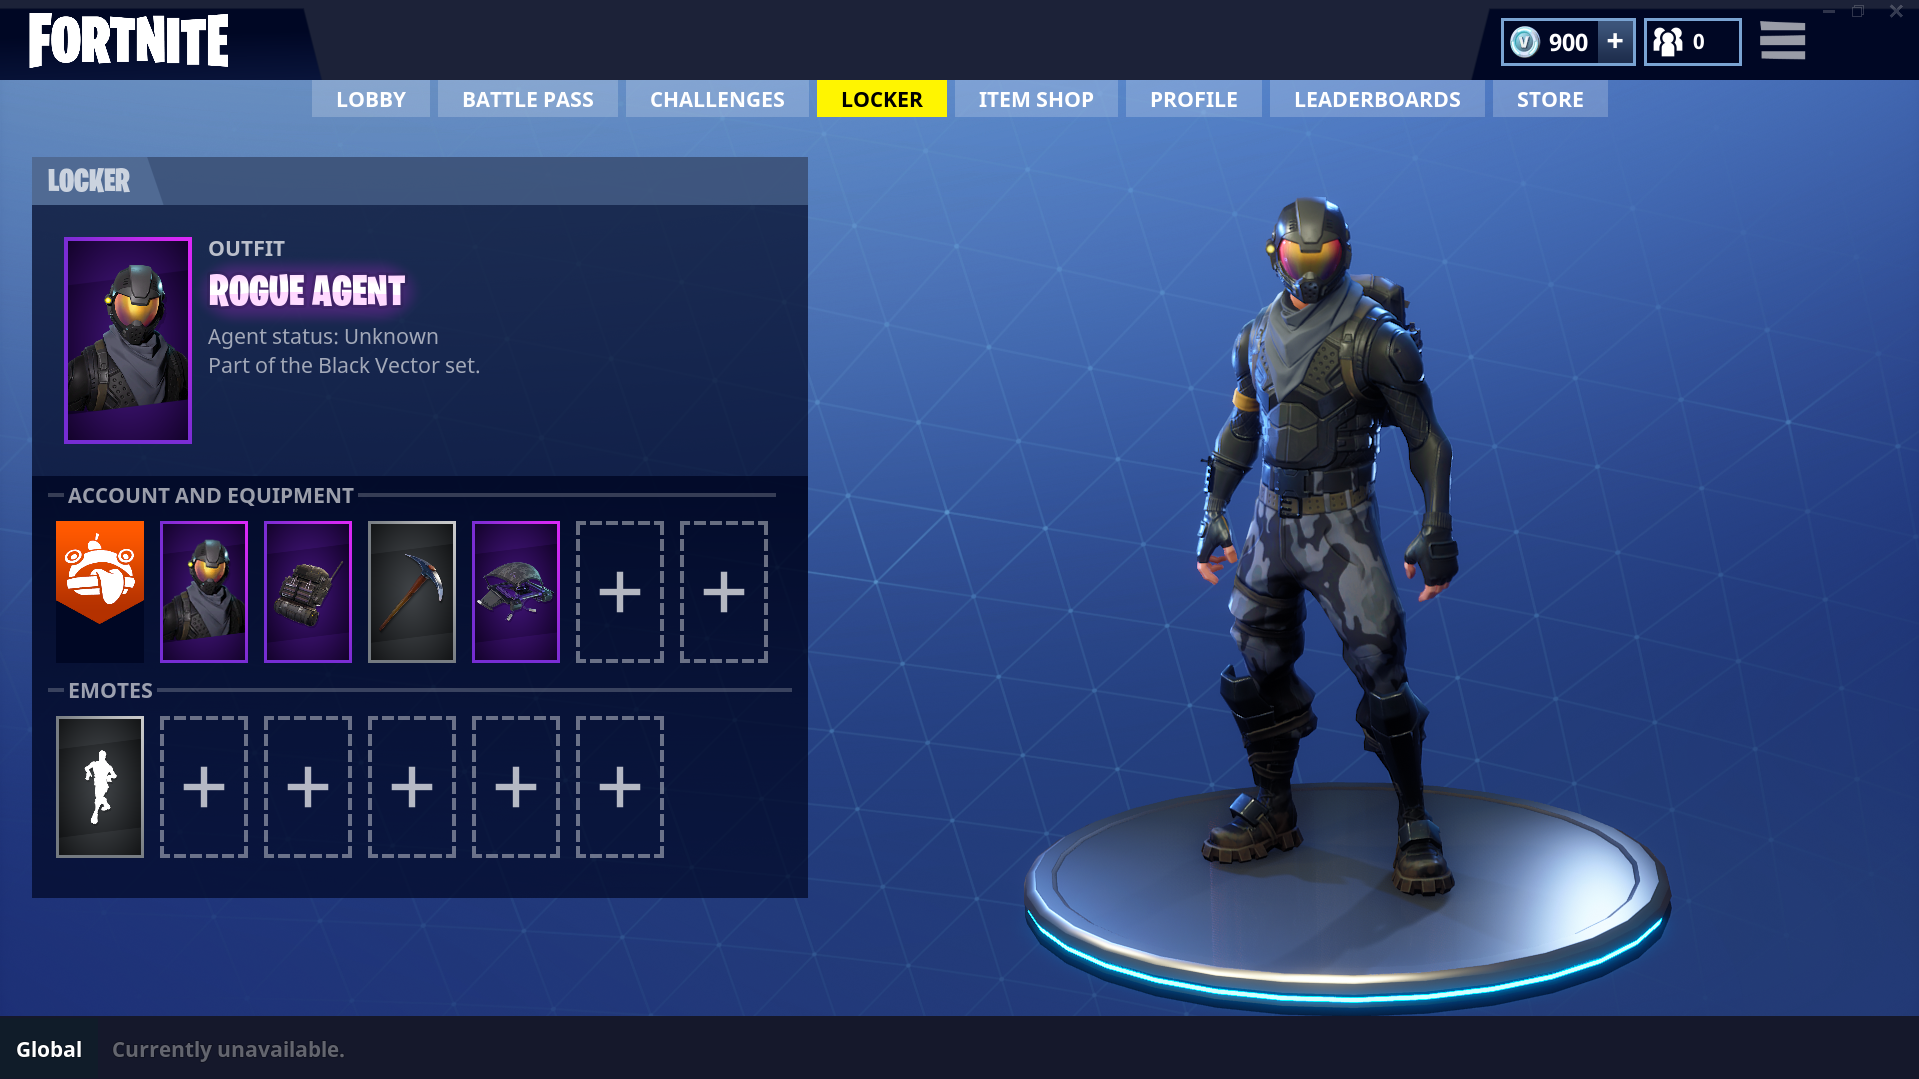 The new skin is out and its called Rogue Agent FortNiteBR